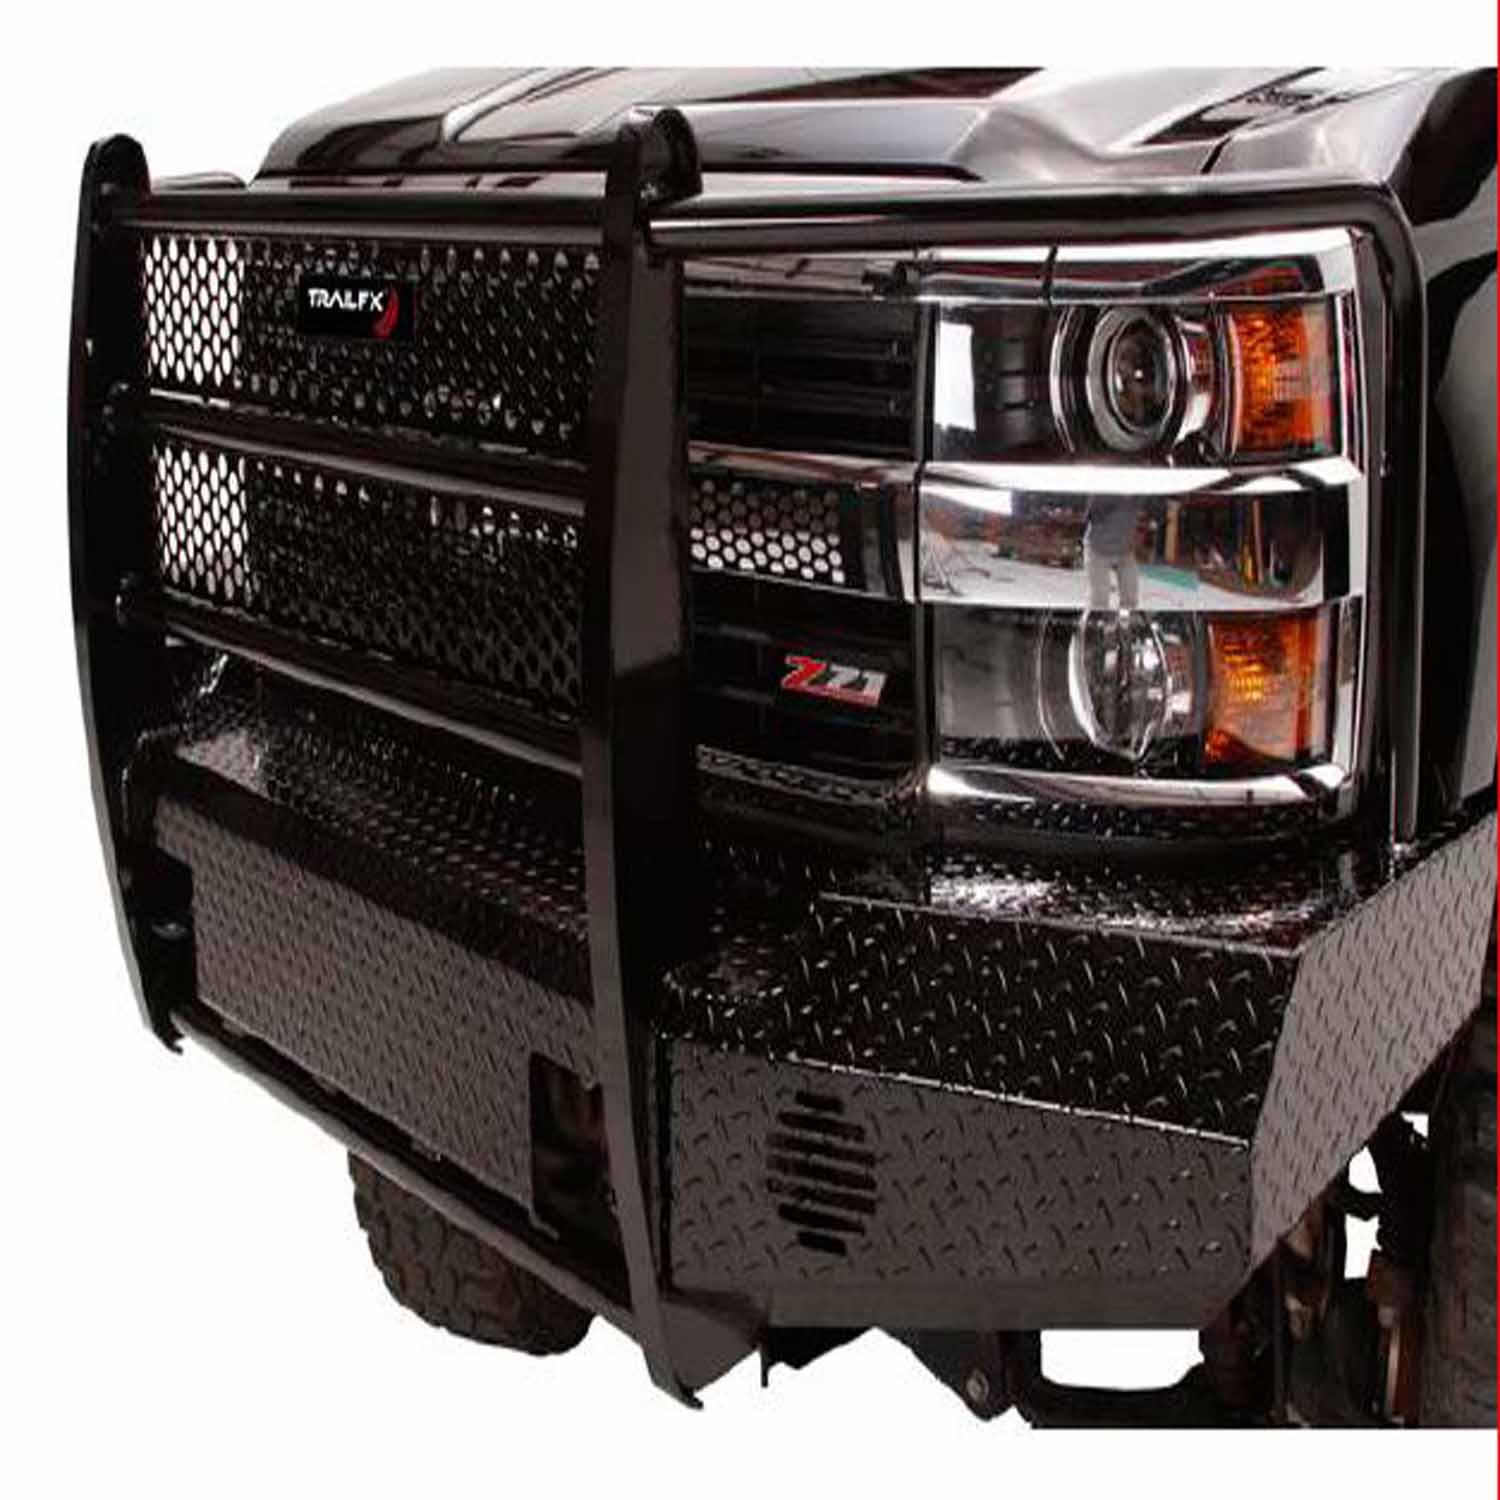 One Piece Design Direct Fit Mounting Hardware Included With Grille Guard and Gri